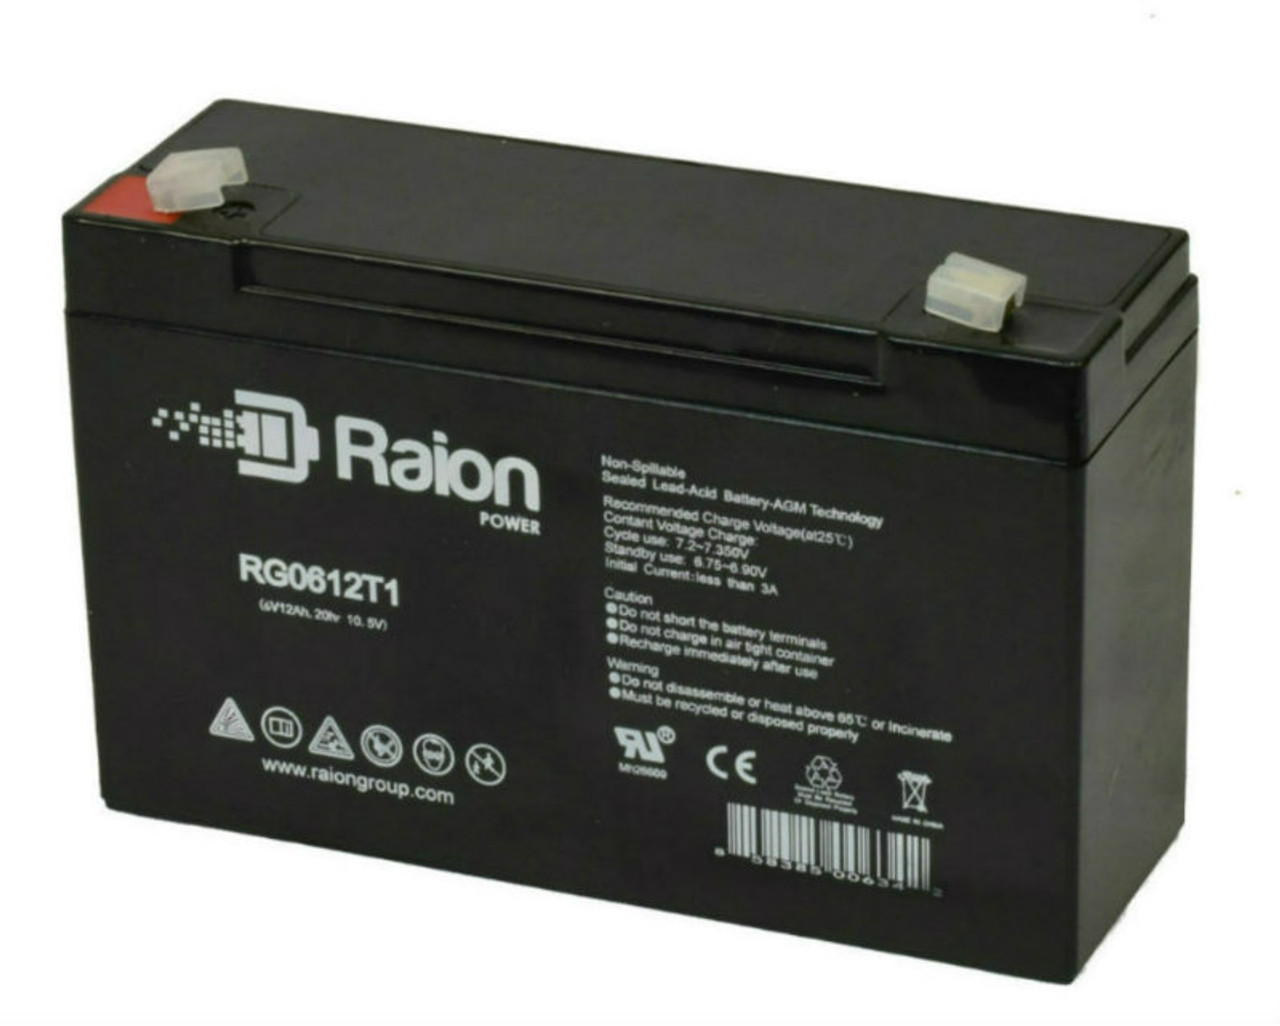 Raion Power RG06120T1 Replacement 6V 12Ah Emergency Light Battery for Mule 12LX2